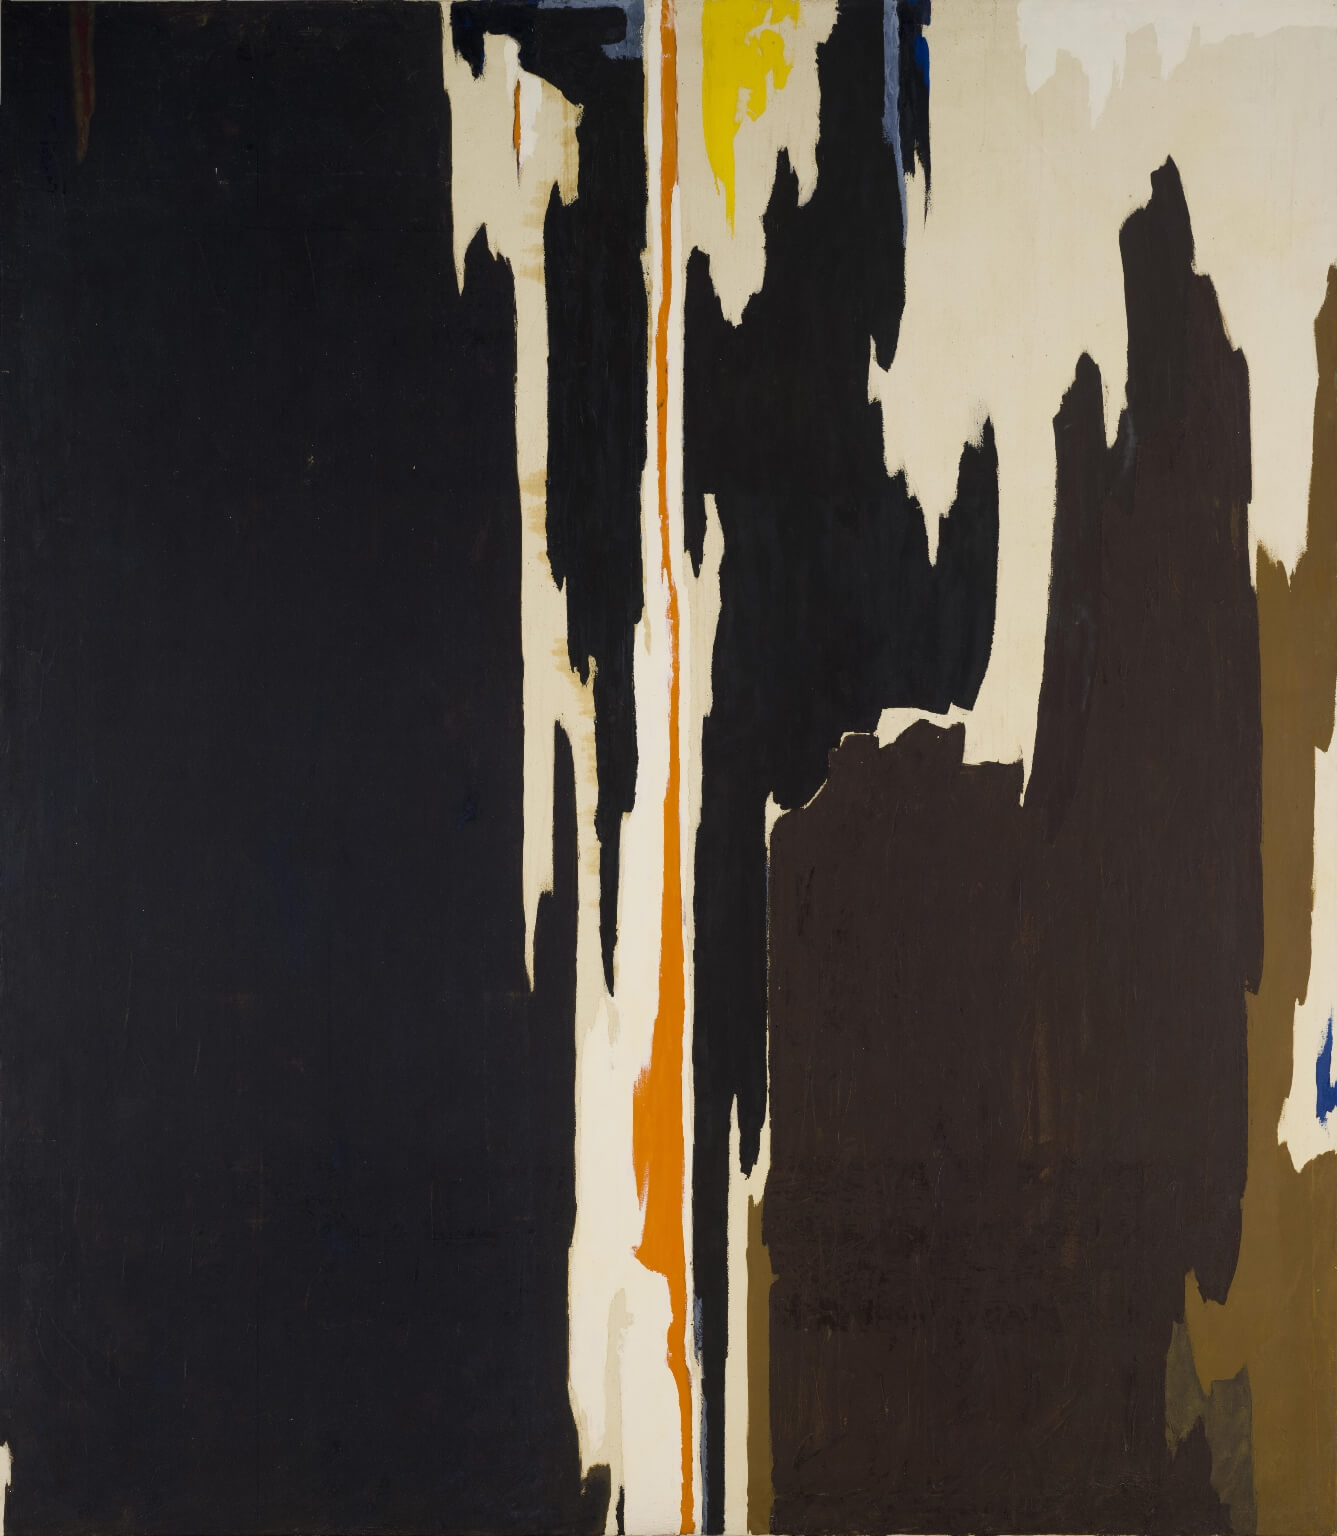 Abstract oil painting with two large sections of black, some bare canvas separating the areas, and small sections of brown, orange, and yellow